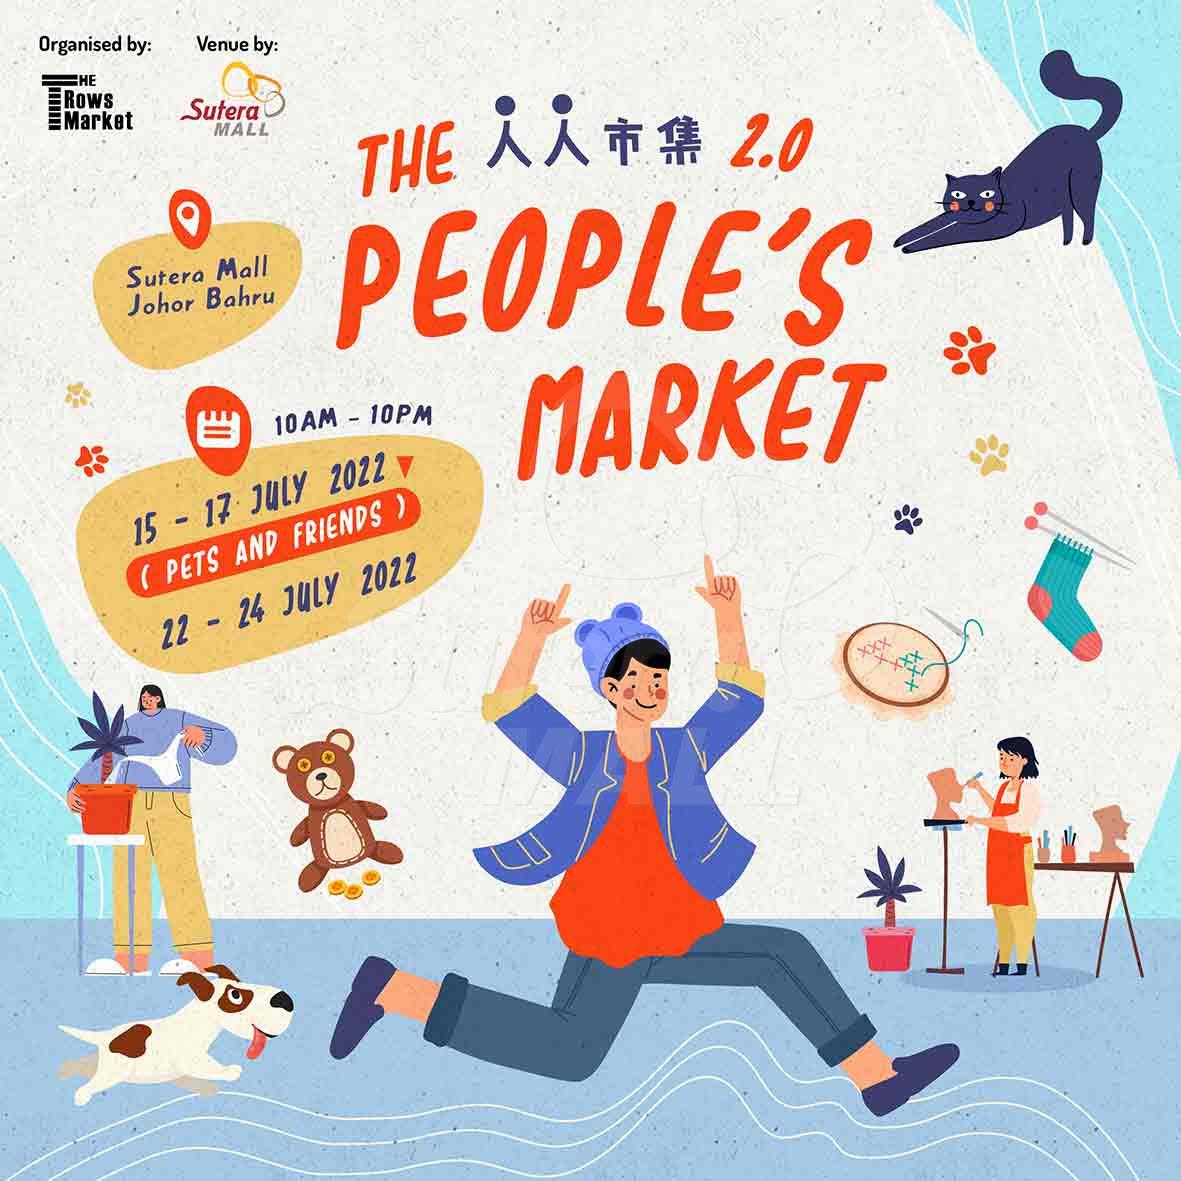 <div class='event-date'>22 Jul 2022 to 24 Jul 2022</div><div class='event-title'><h4>The People's Market</h4></div>